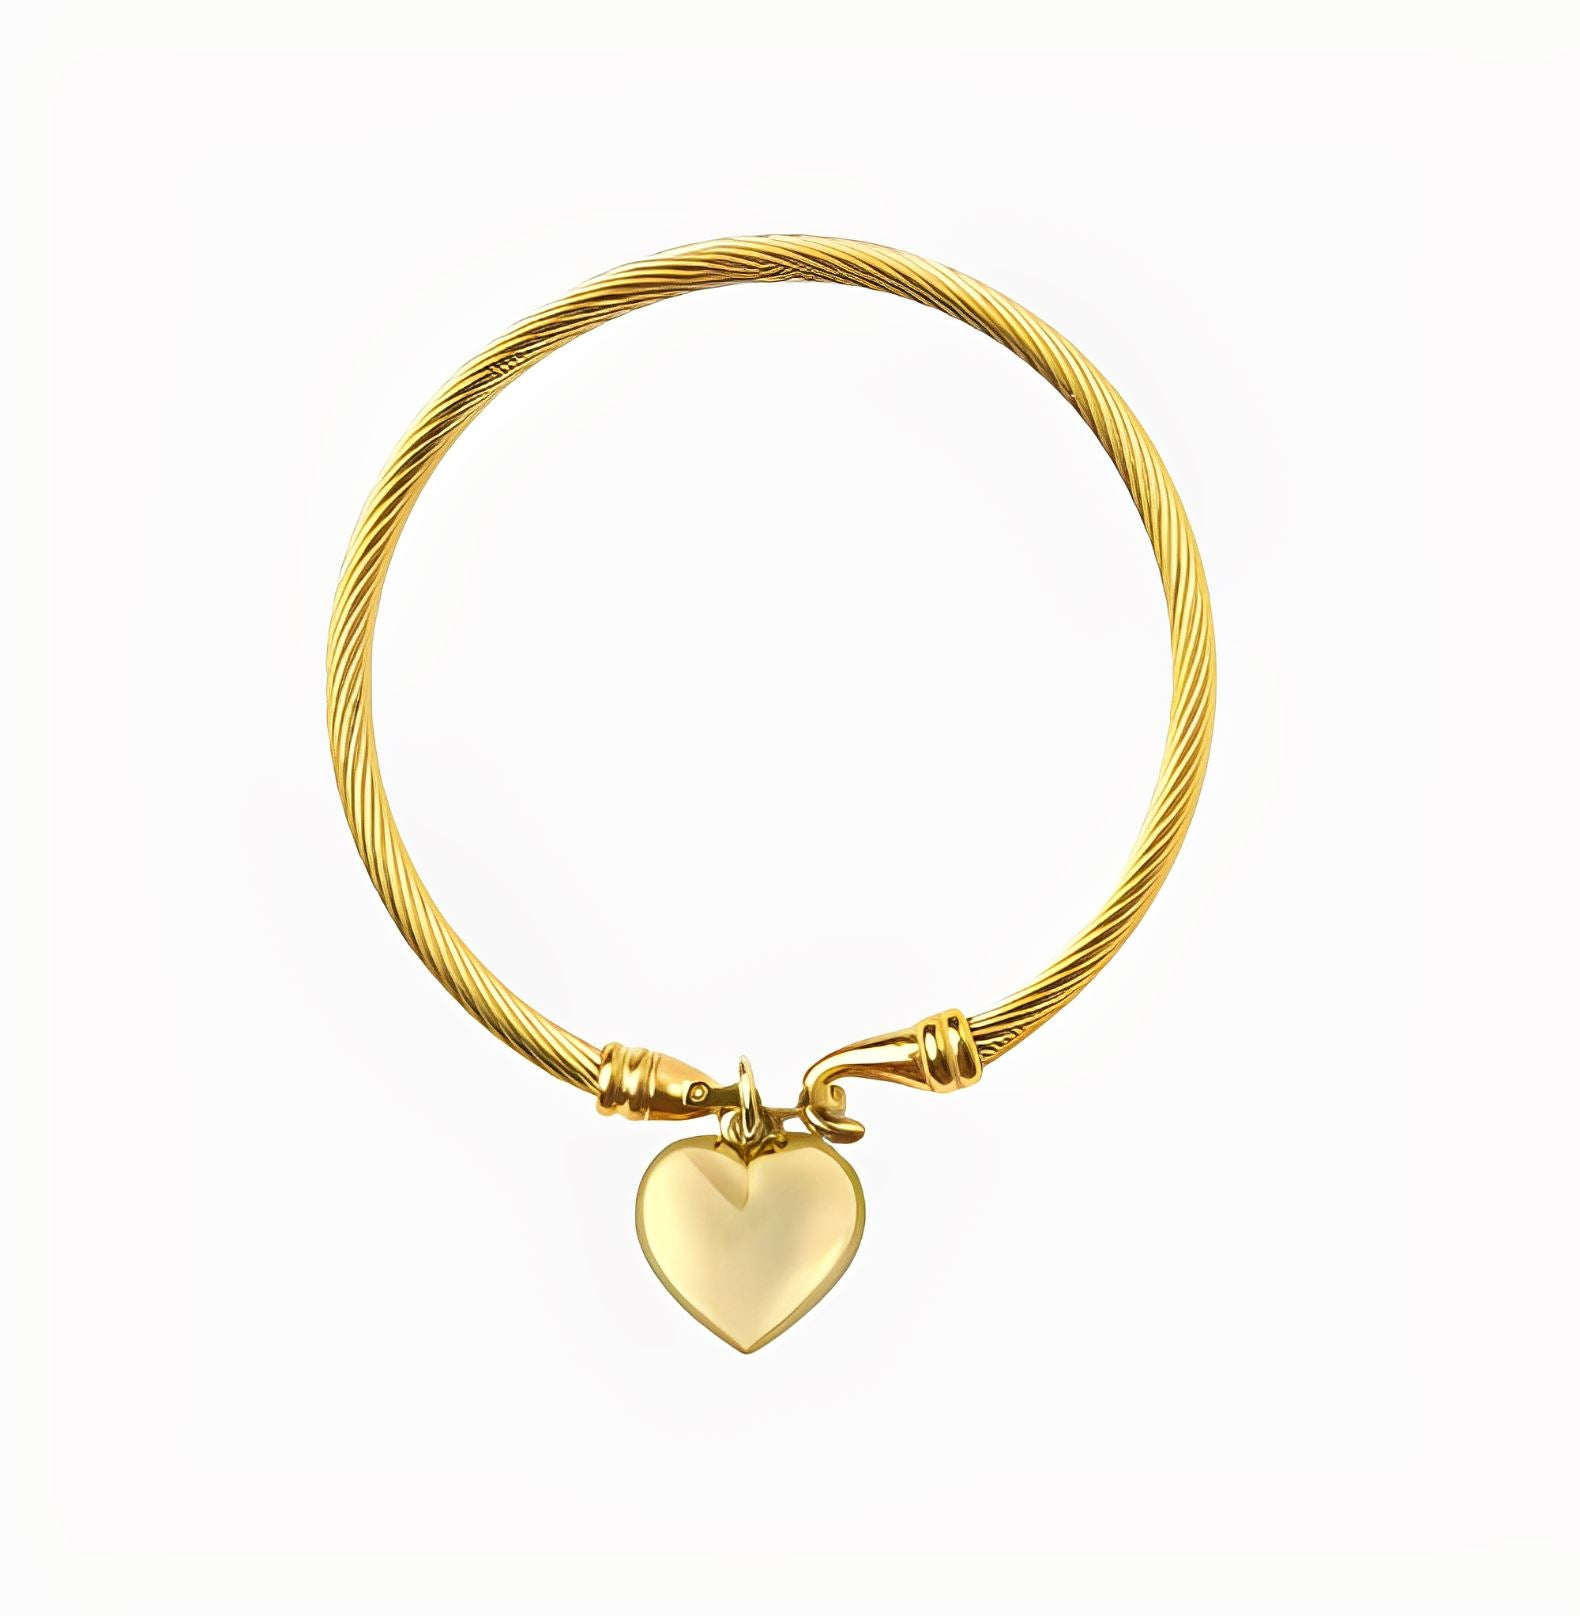 HEART PENDANT BRACELET braclet Yubama Jewelry Online Store - The Elegant Designs of Gold and Silver ! 